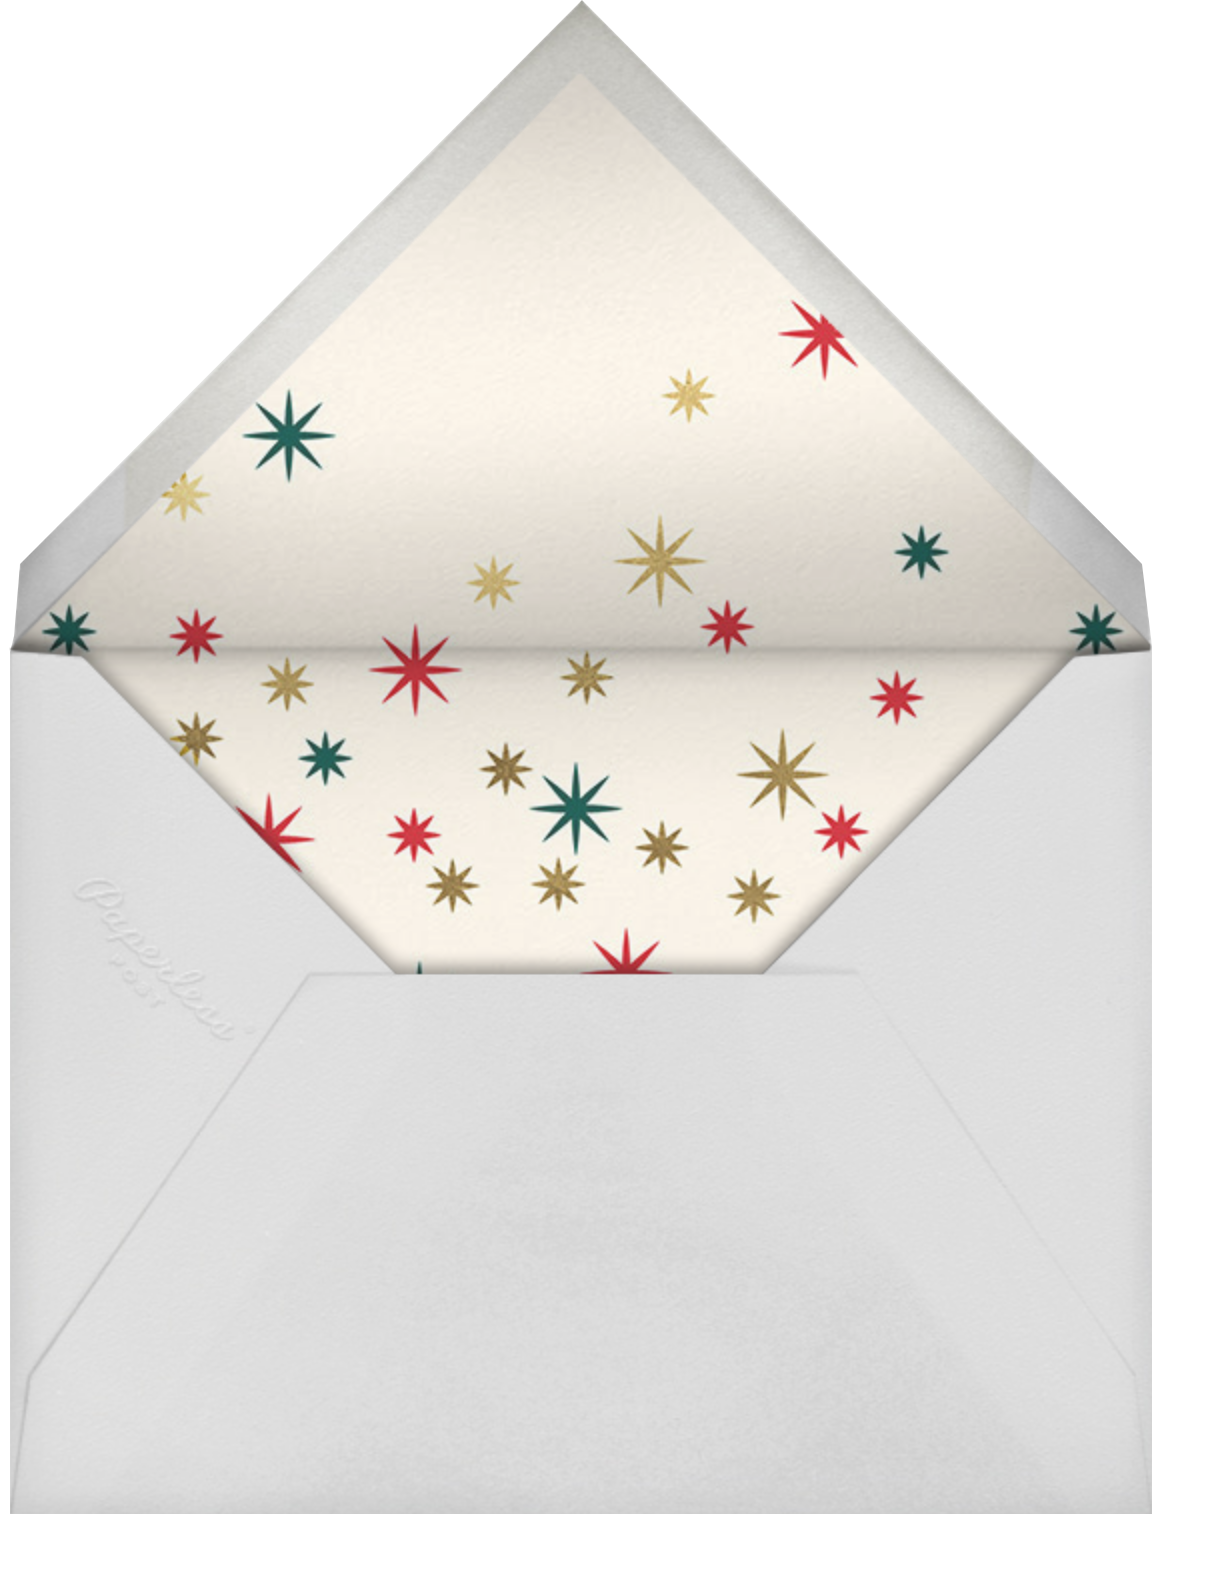 Nordic and Nice - Cheree Berry Paper & Design - Envelope